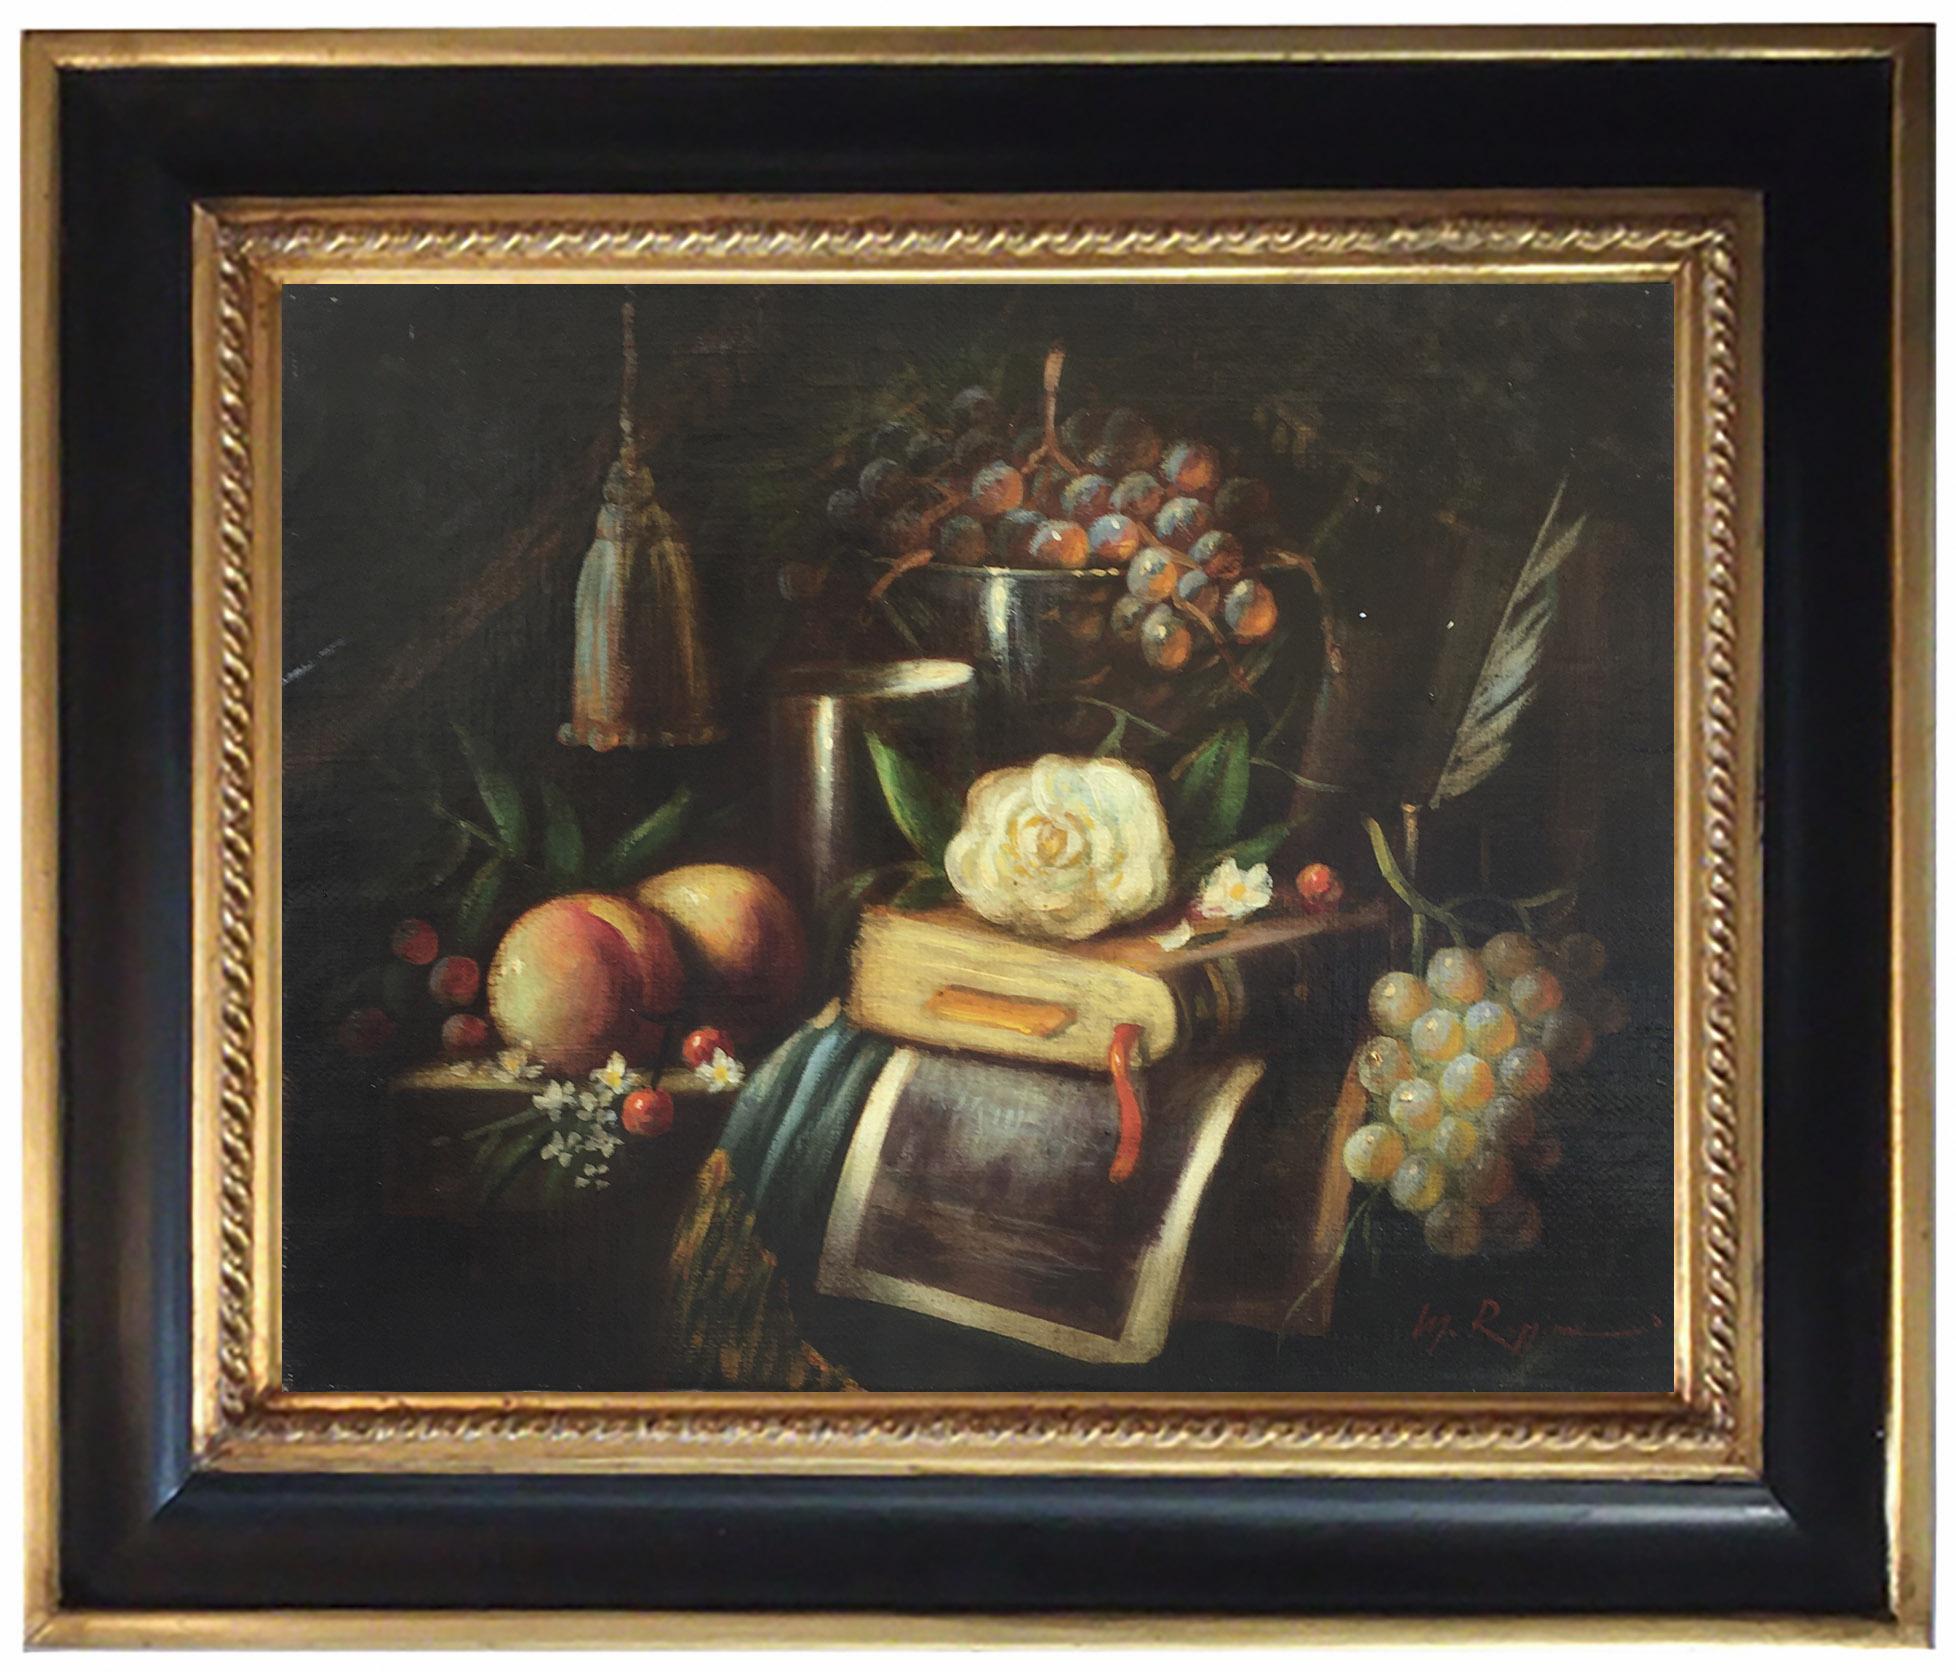 STILL LIFE - Oil on canvas cm. 40x50 by Massimo Reggiani, Italy 2005
Still life, a pictorial representation of foodstuffs, objects or inanimate objects, was one of the artistic genres that became completely independent in the seventeenth century.